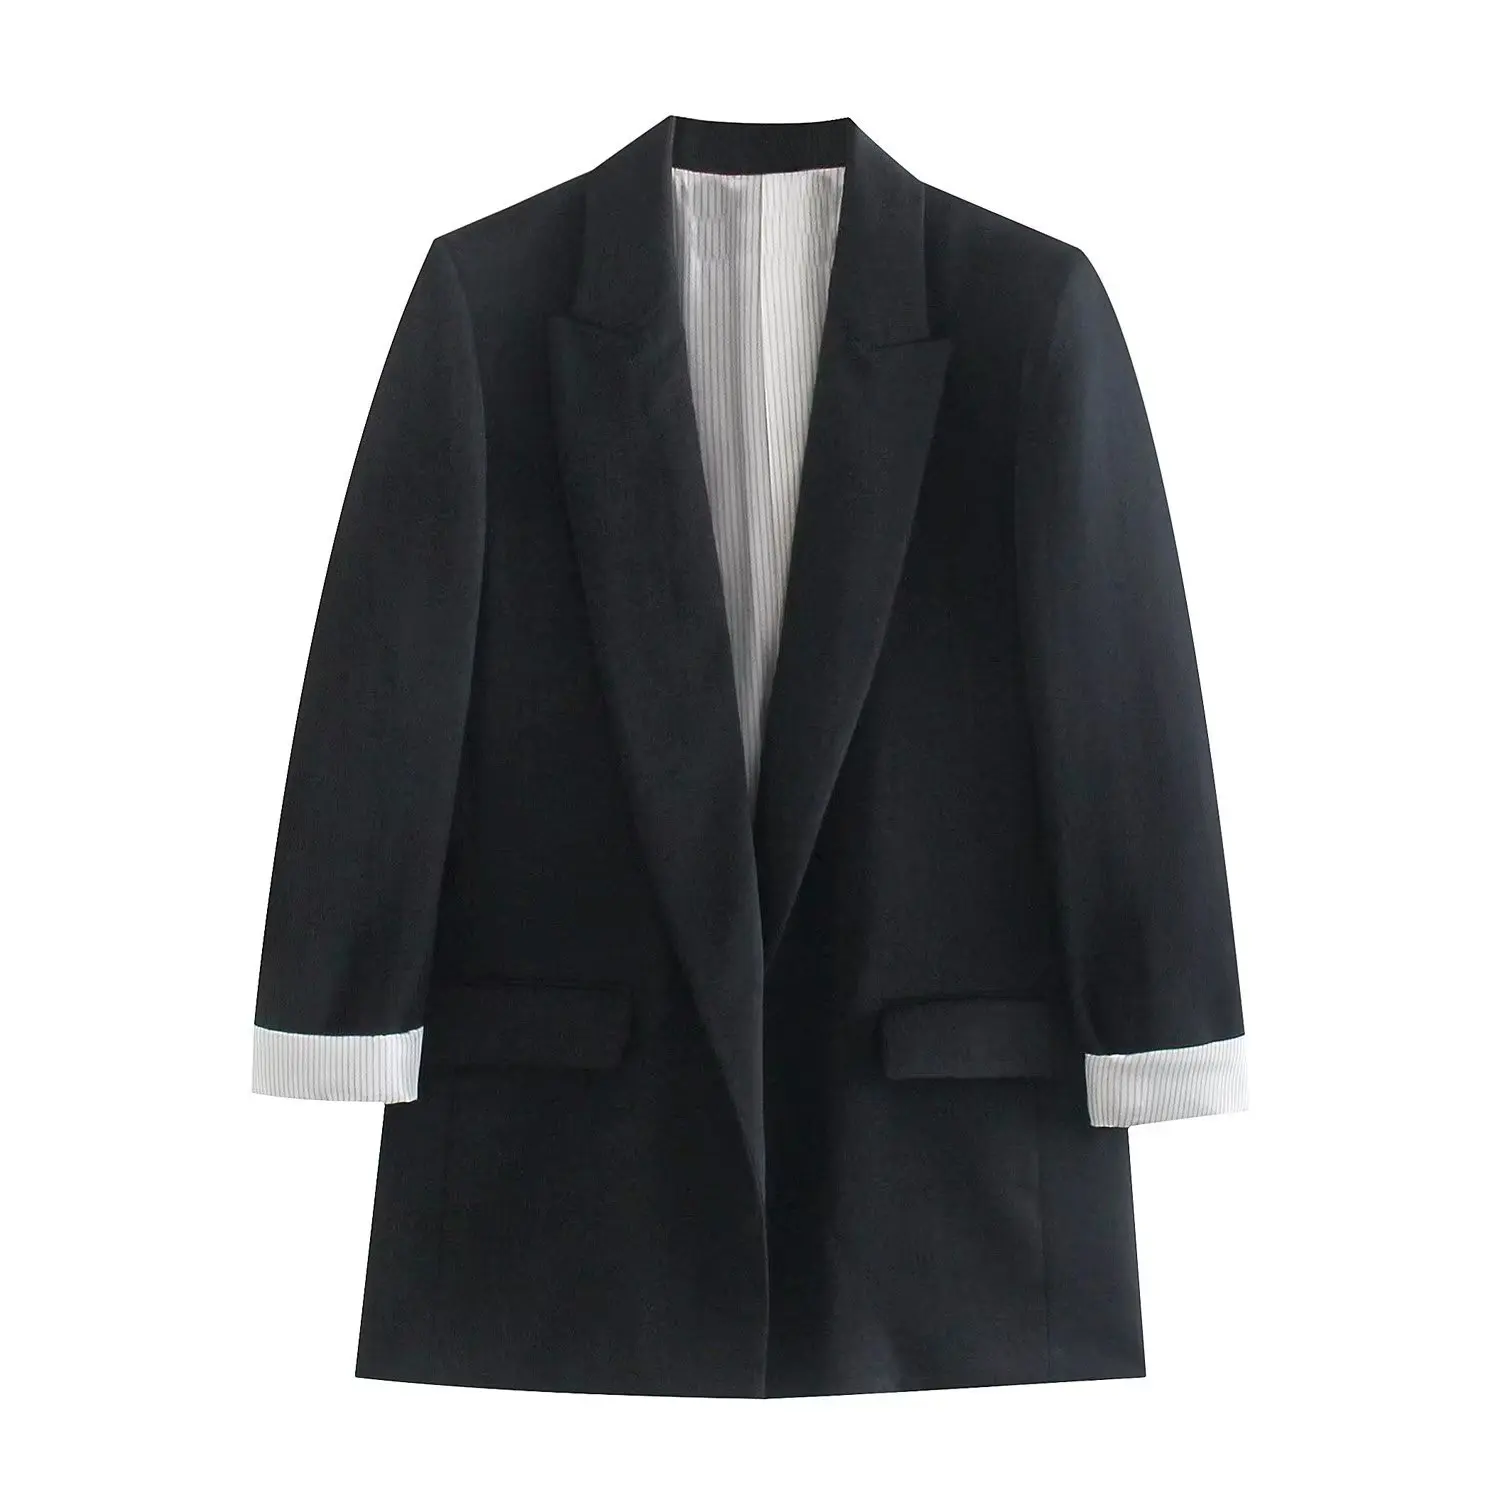 

Autumn Female Commuter Black Solid Color Blazer for Women Office Lady Casual Loose Suit Jacket With Rolled Cuffs V-Neck Blazers